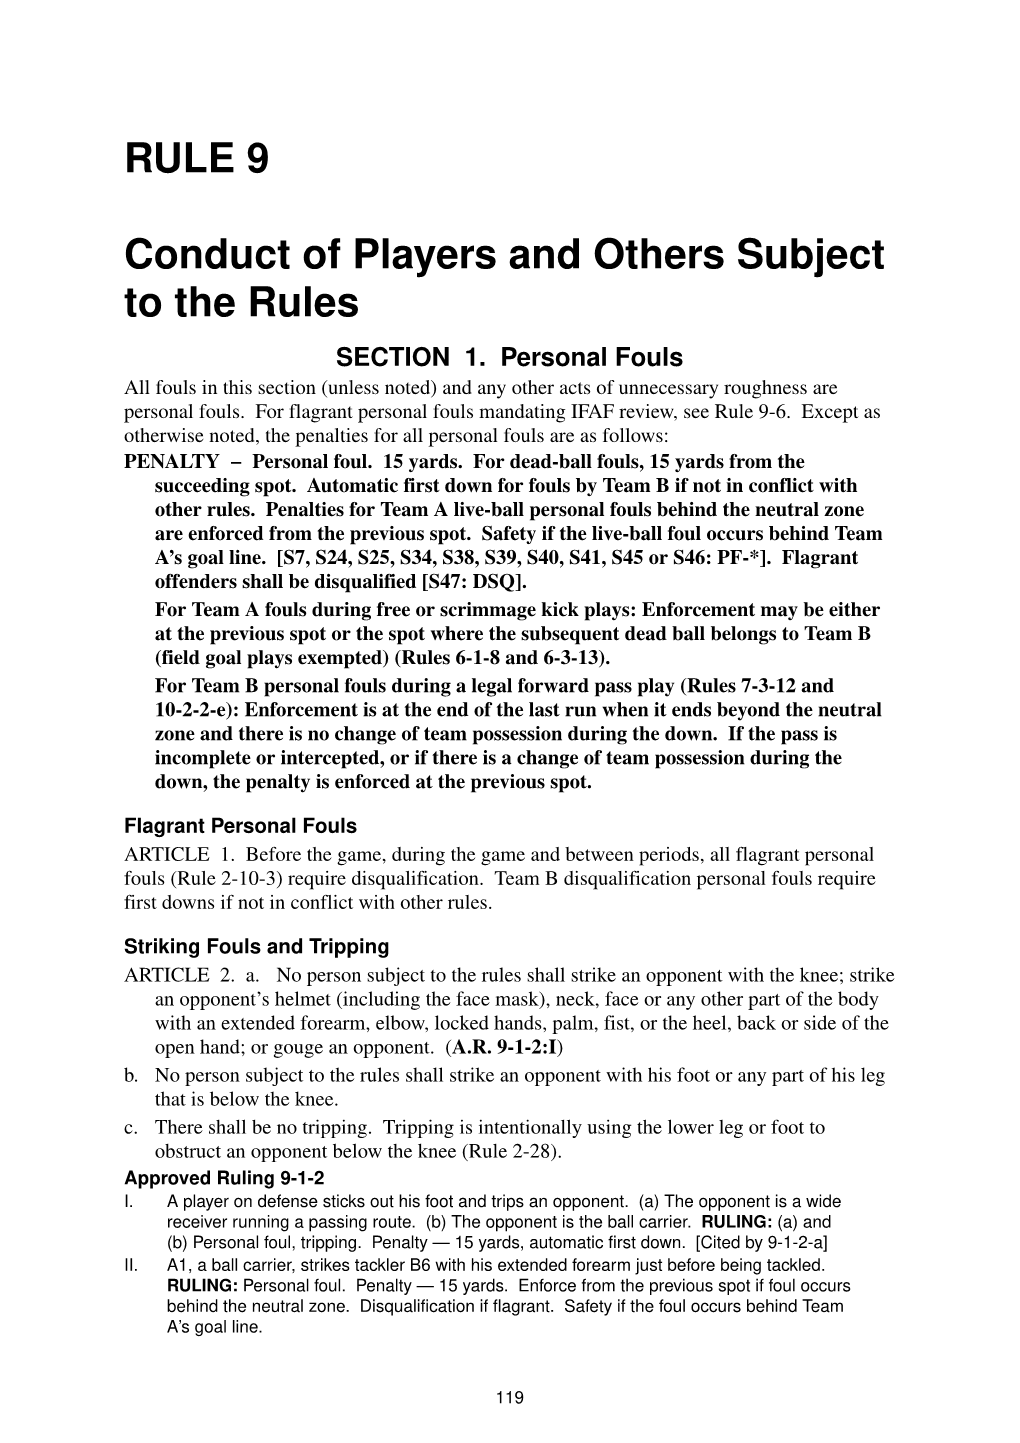 RULE 9 Conduct of Players and Others Subject to the Rules